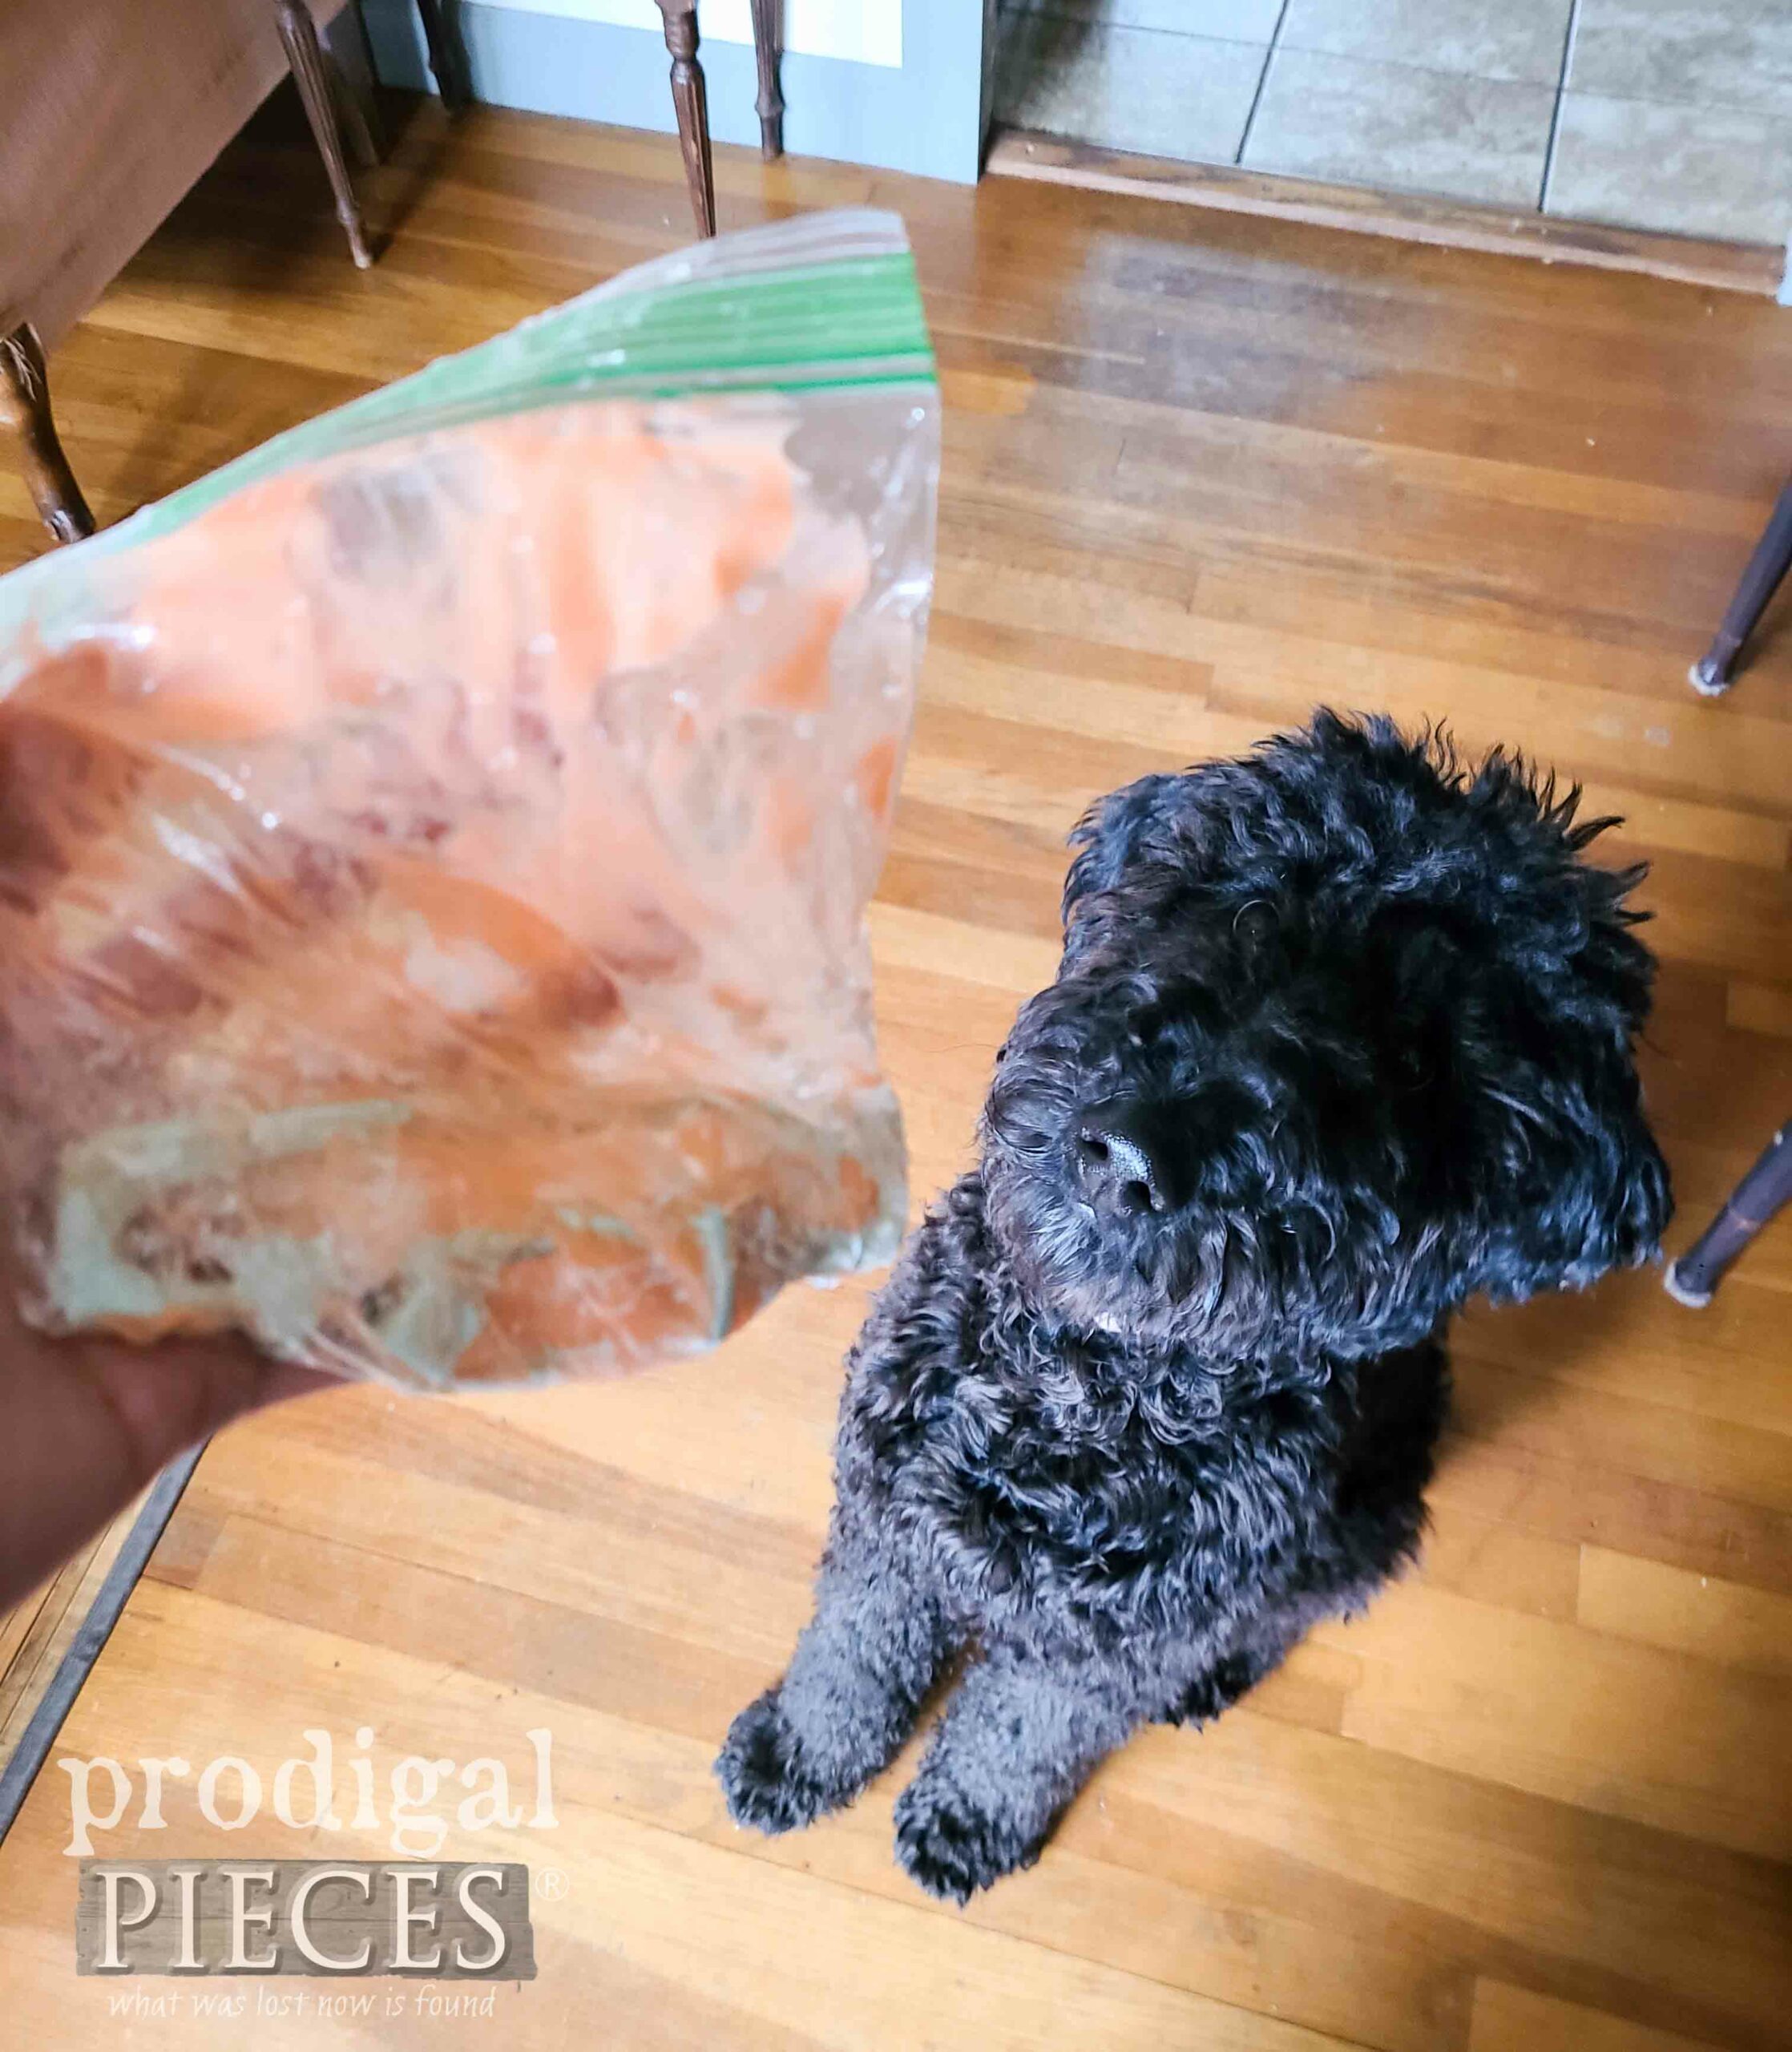 Loula the Goldendoodle Puppy Sees "Snack" | prodigalpieces.com #prodigalpieces